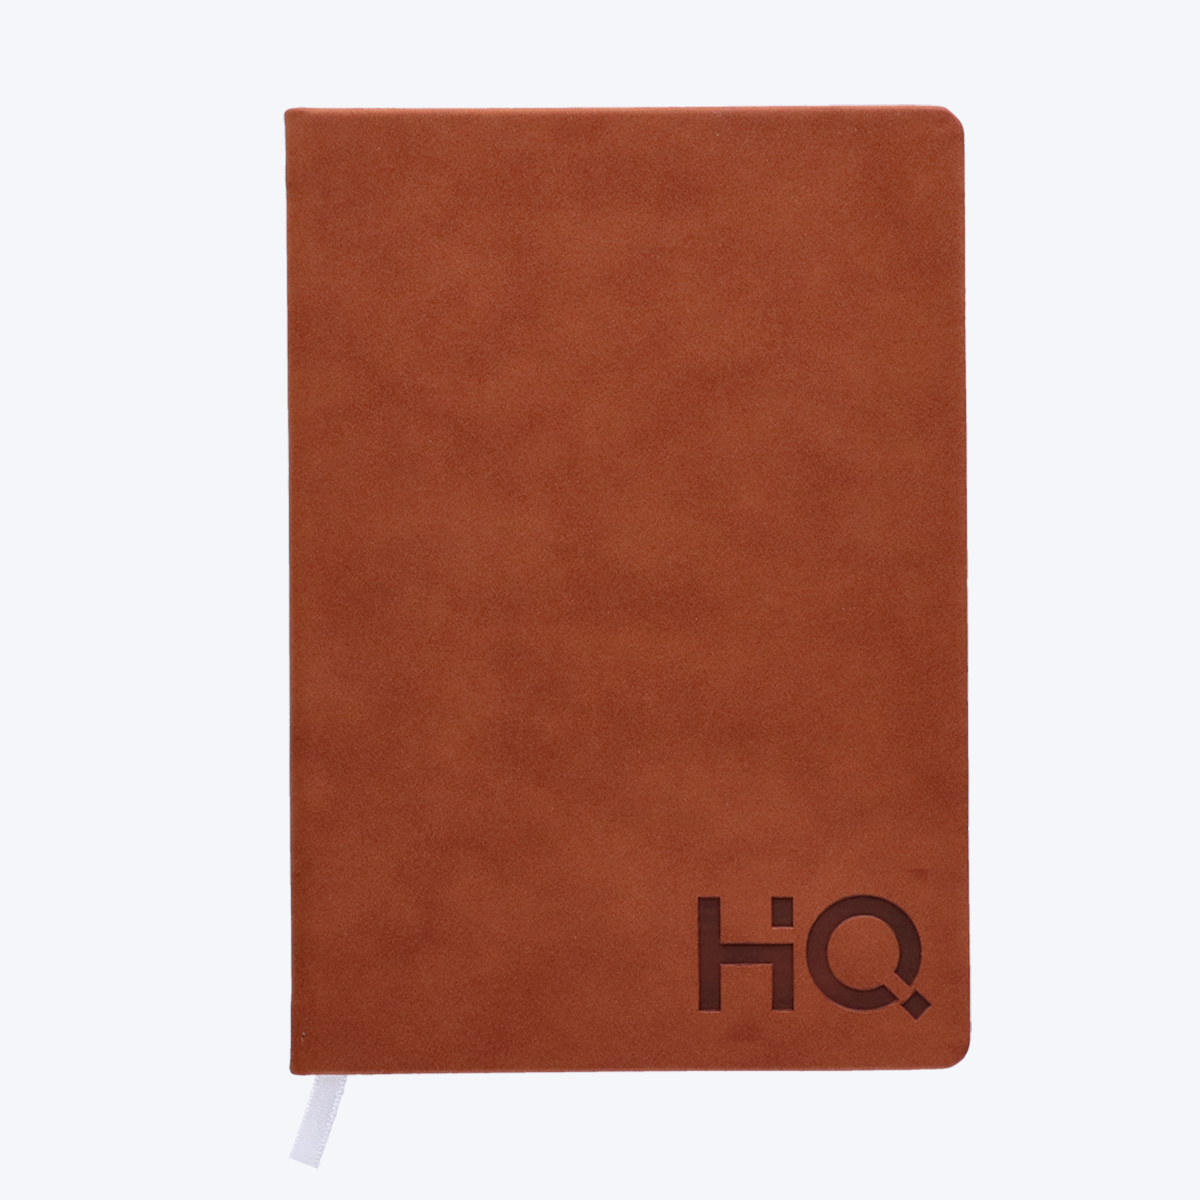 Navneet HQ | Elegance| Hard Case Notebook| Leather-like Look | Matte finish| For Professional and Personal Use | Assorted Colours|Single Line | A5 Size - 21 cm x 14.8 cm | 192 Pages